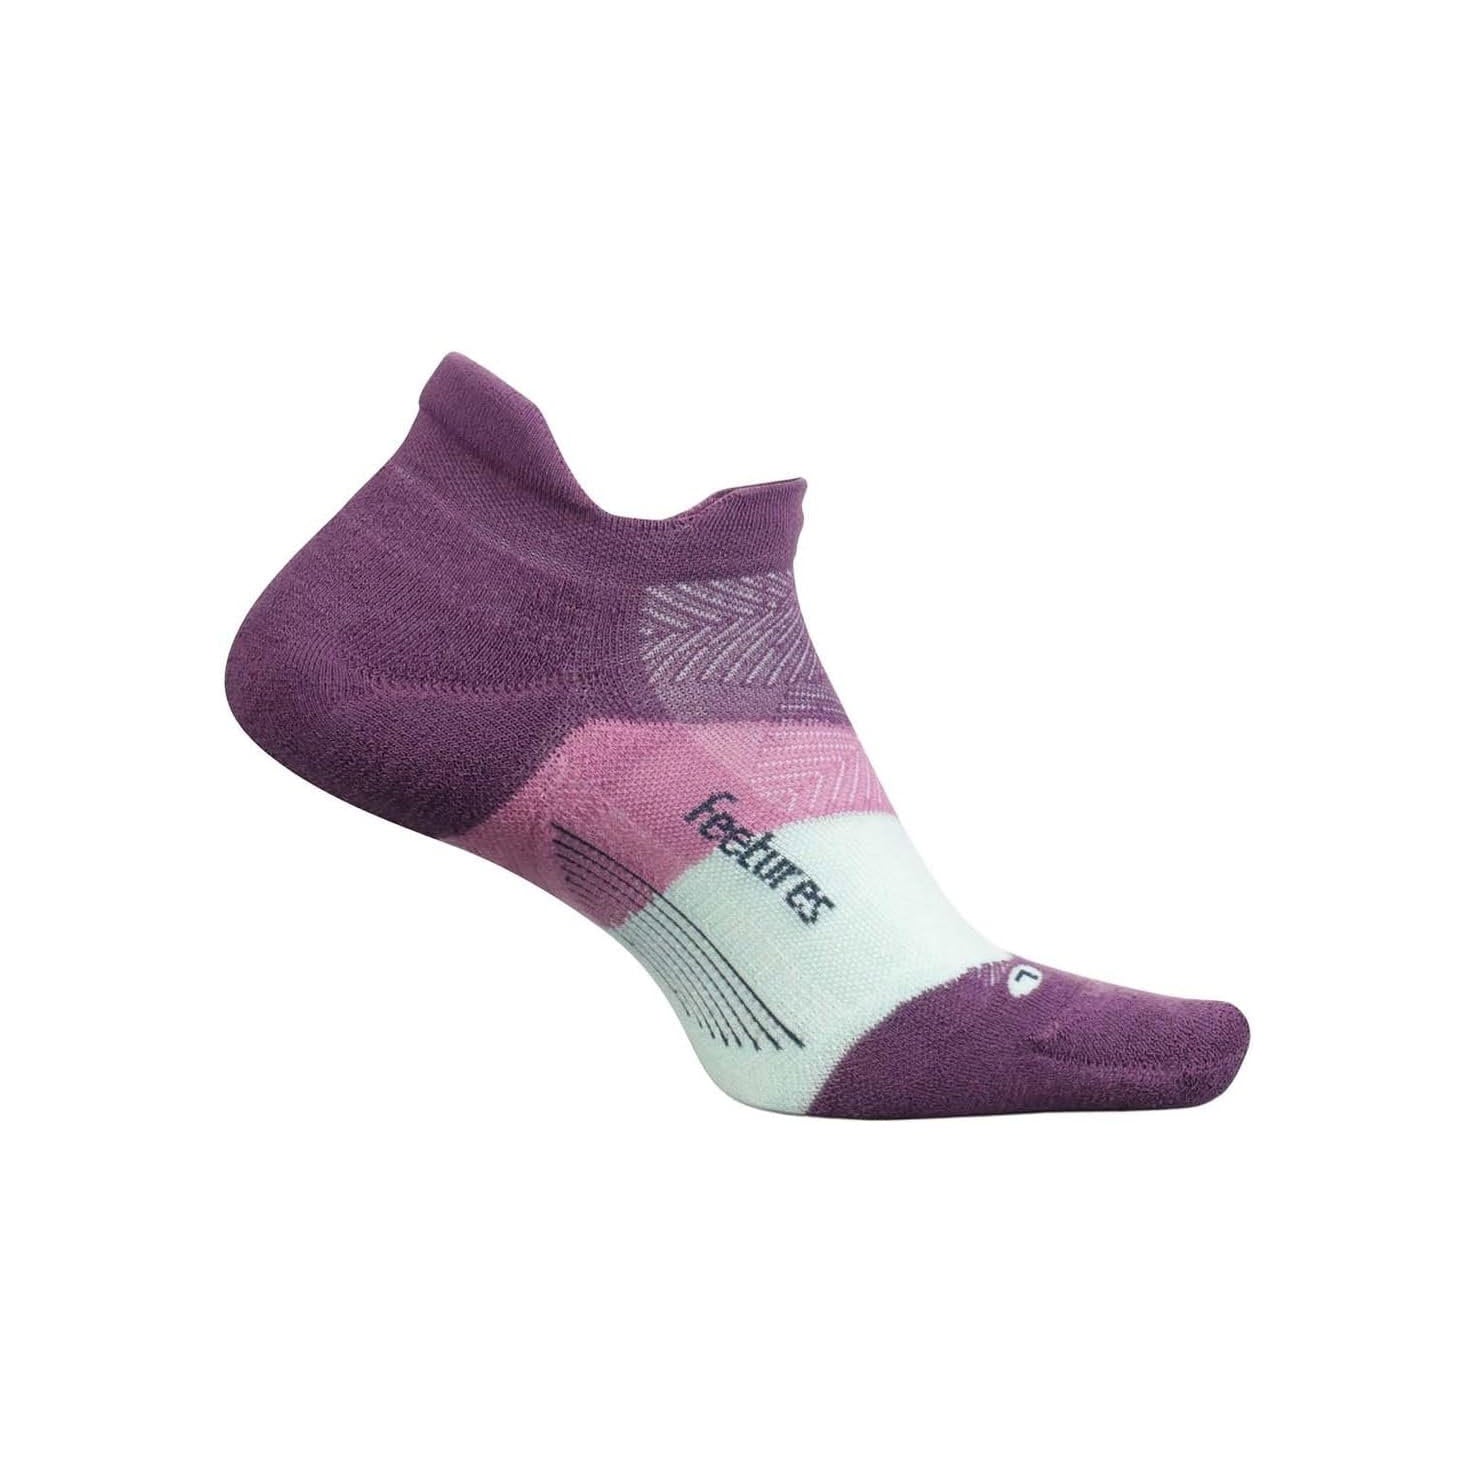 A single purple and white ankle sock with Feetures Elite Ultra Light No Show Tab Peak Purple printed on the side, displayed against a white background.